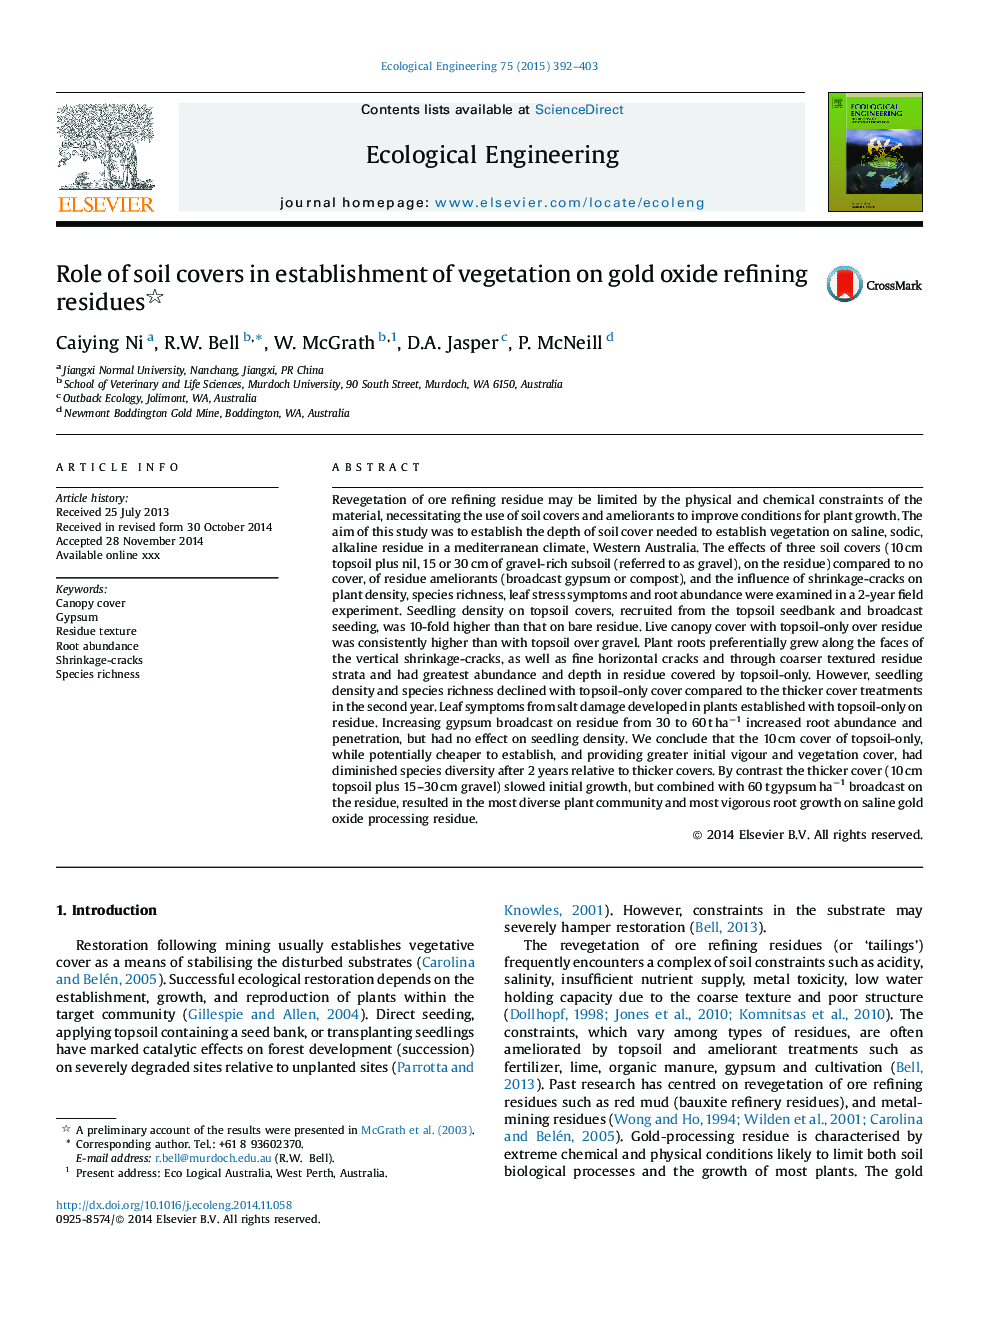 Role of soil covers in establishment of vegetation on gold oxide refining residues